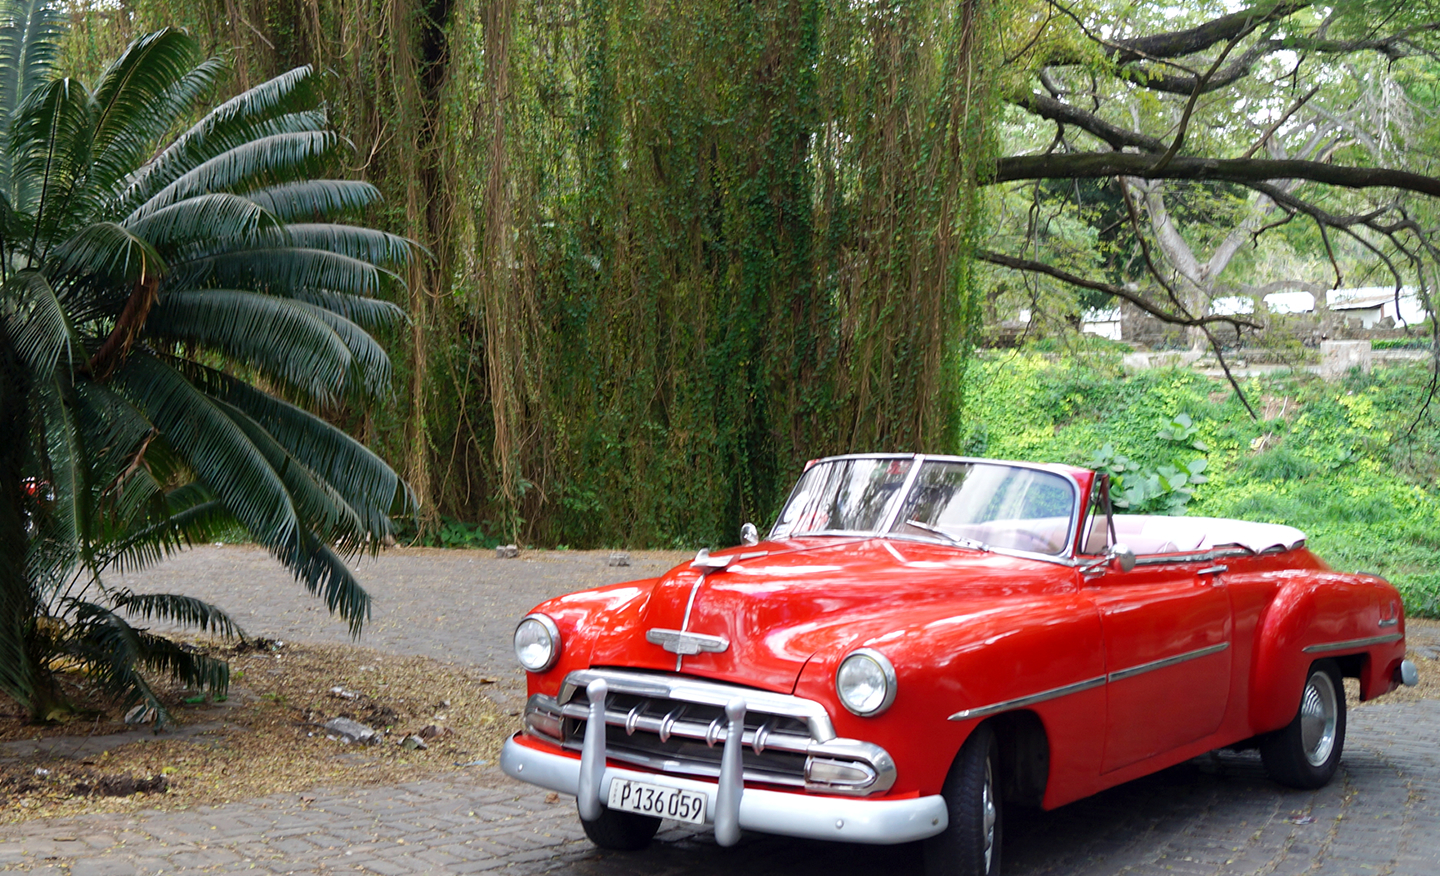 cuba old car with travel agency